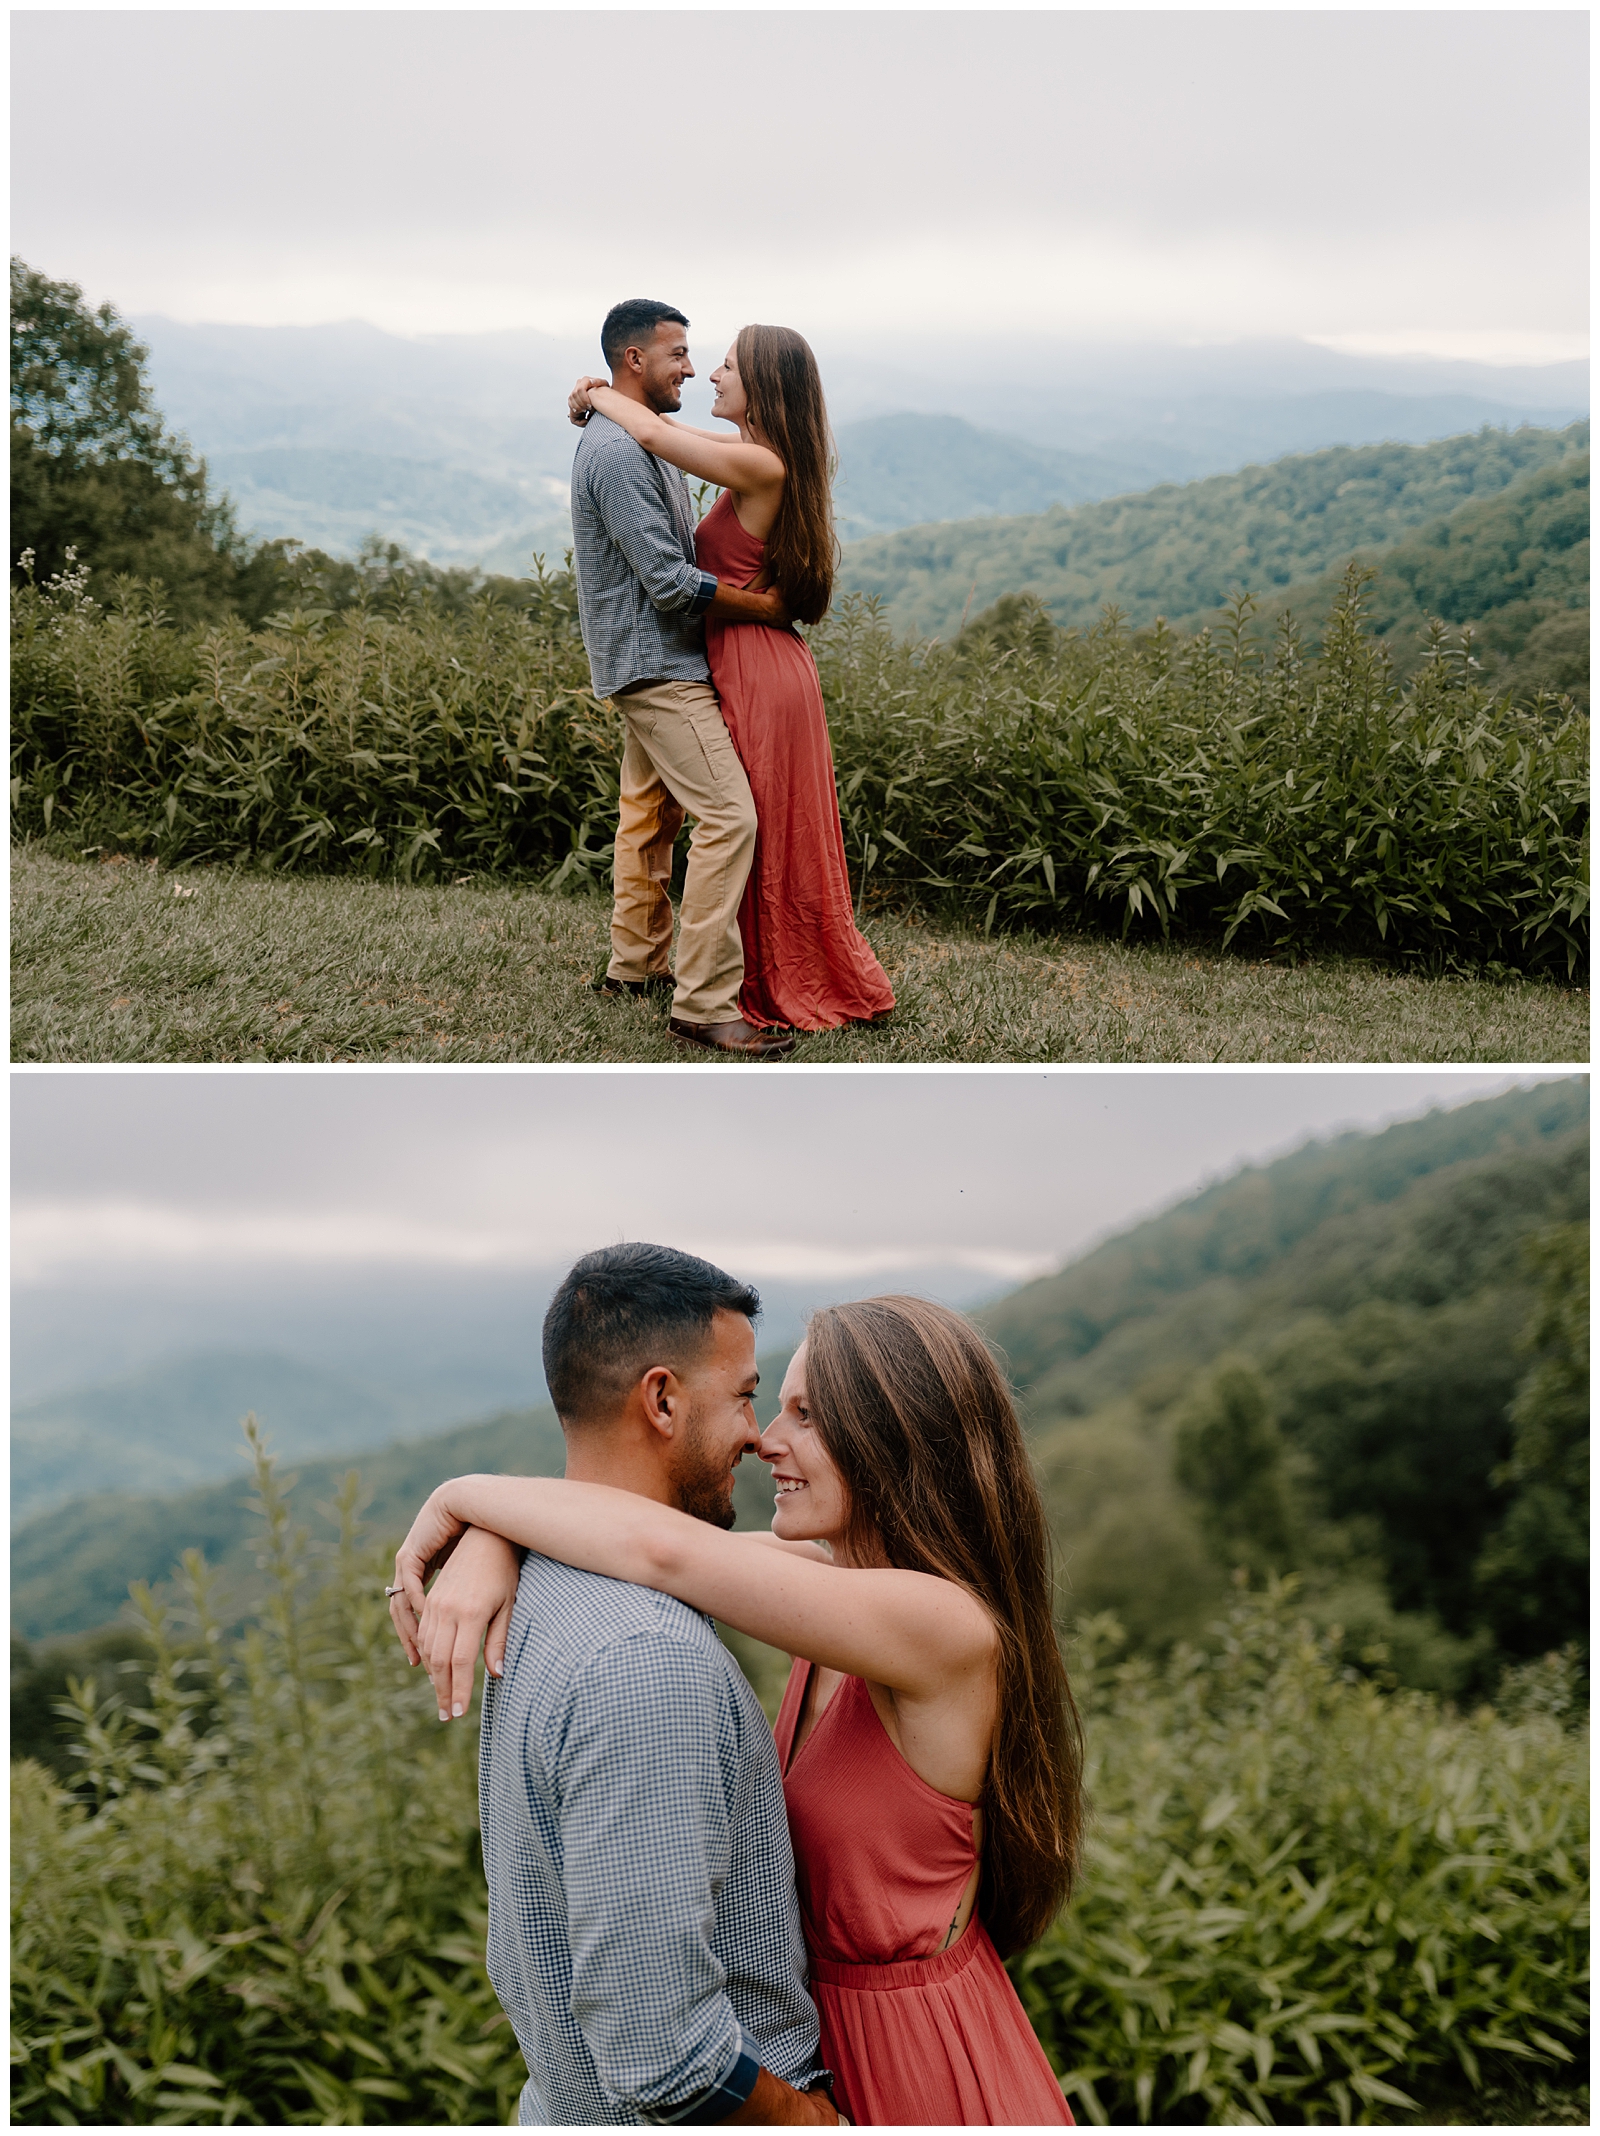 Foggy mountain engagement session along the Blue Ridge Parkway